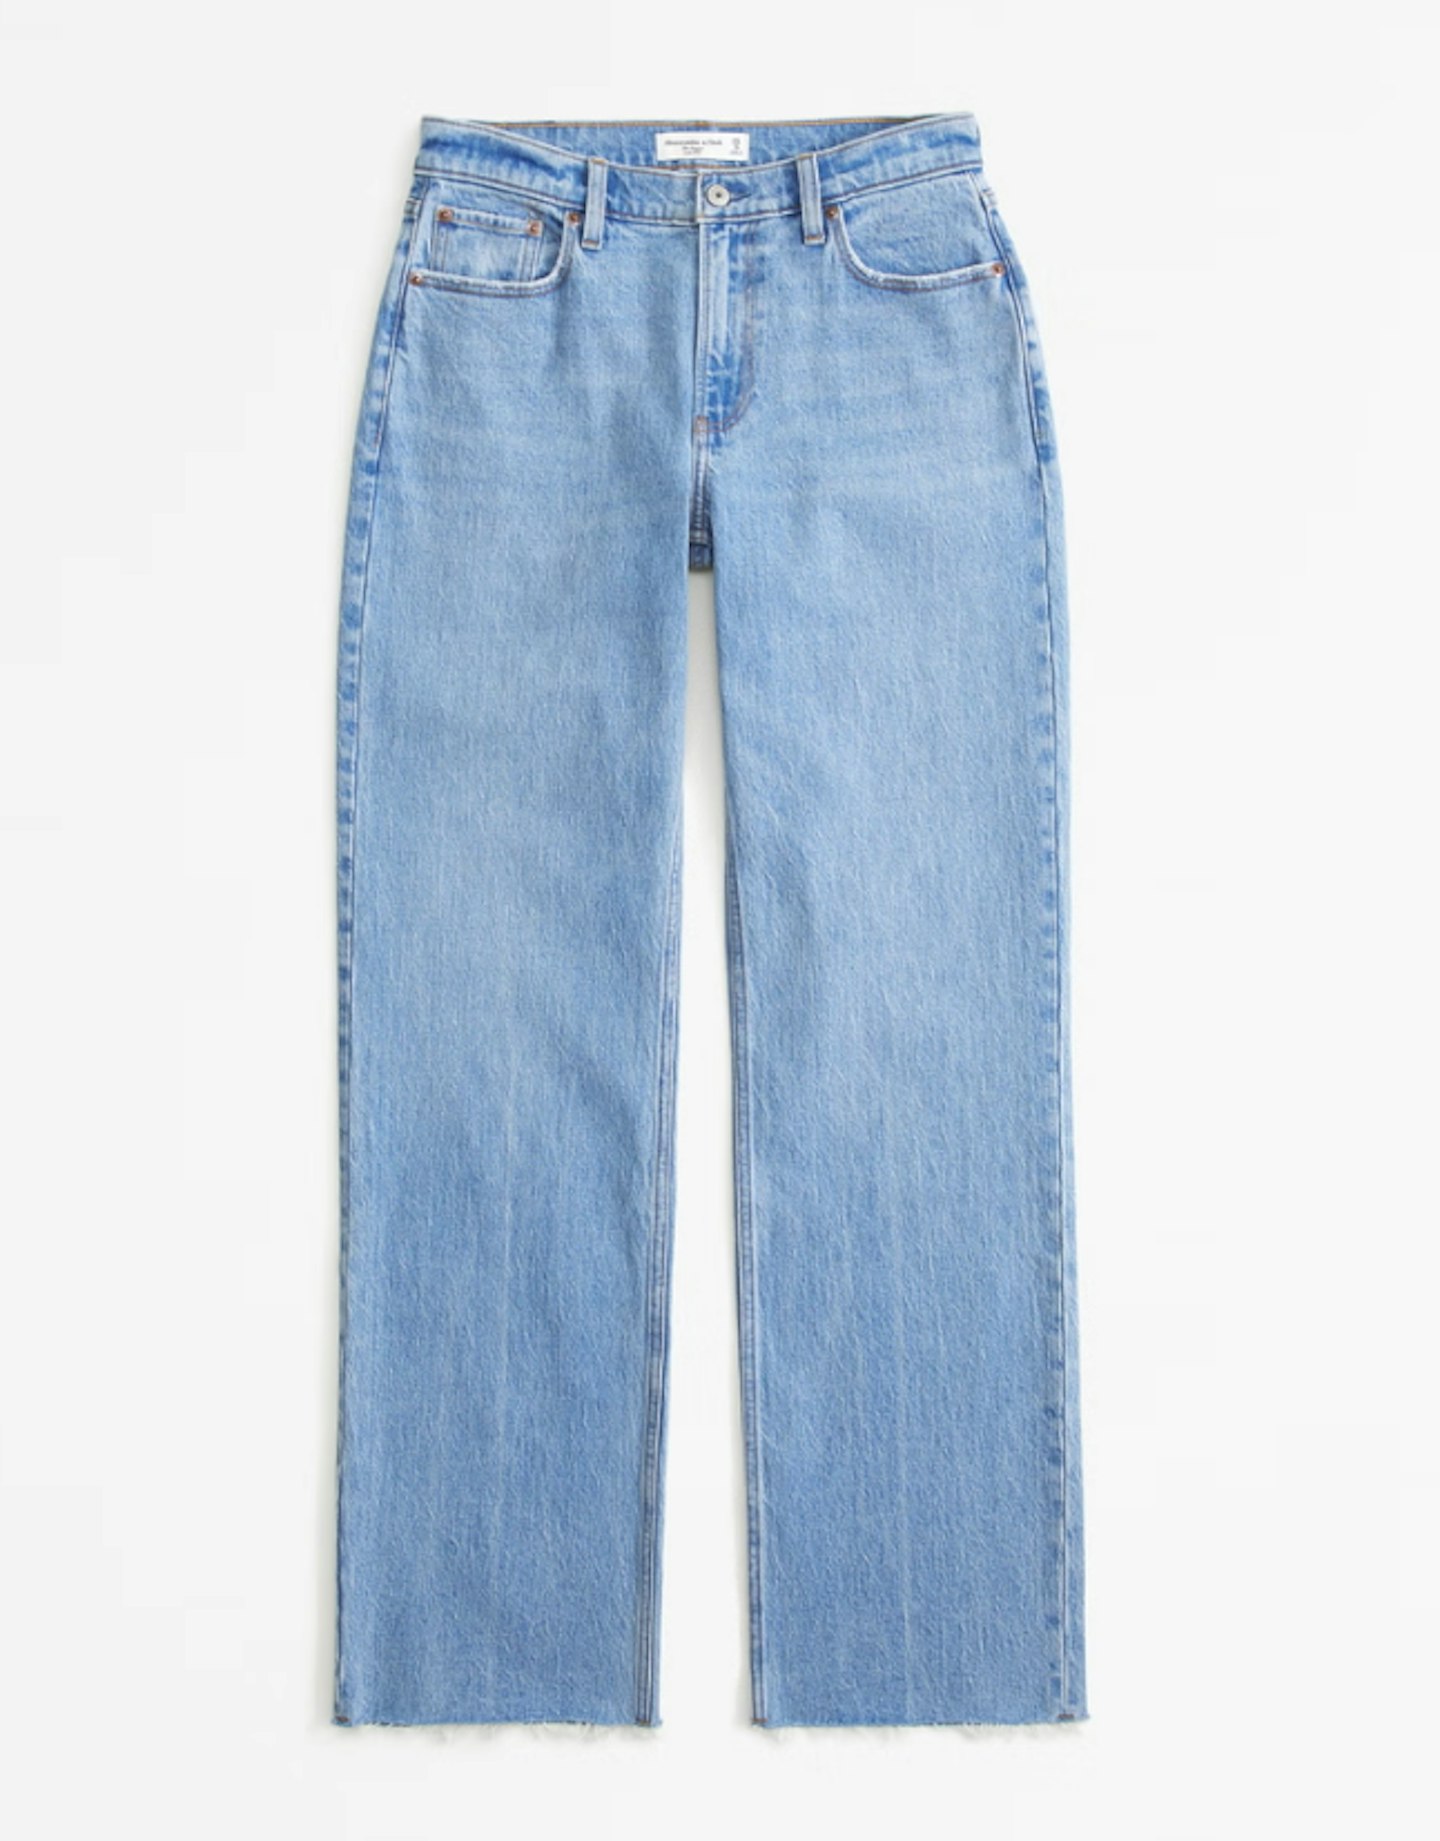 Abercrombie & Fitch, Low Rise Baggy Jean